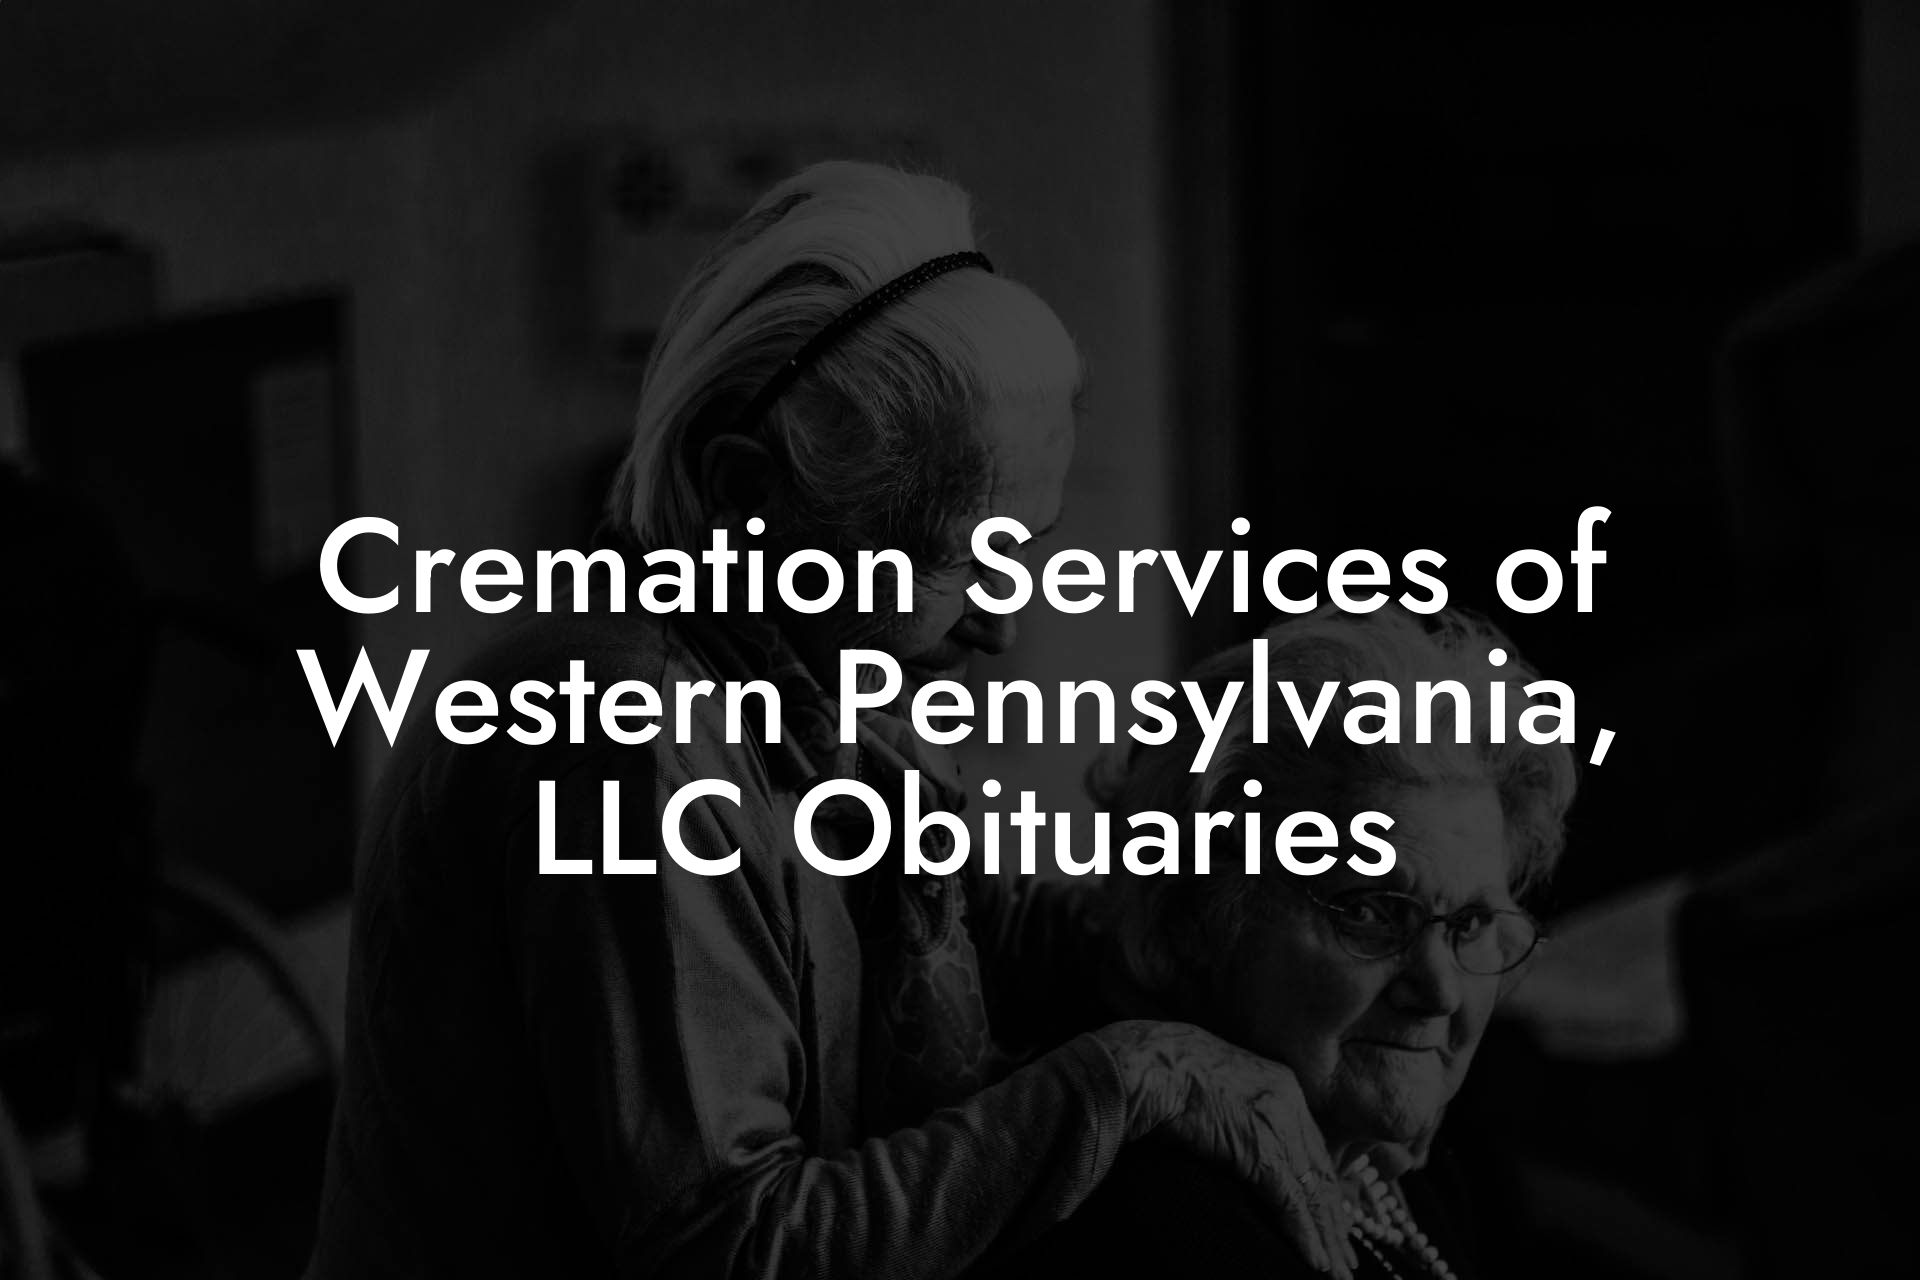 Cremation Services of Western Pennsylvania, LLC Obituaries